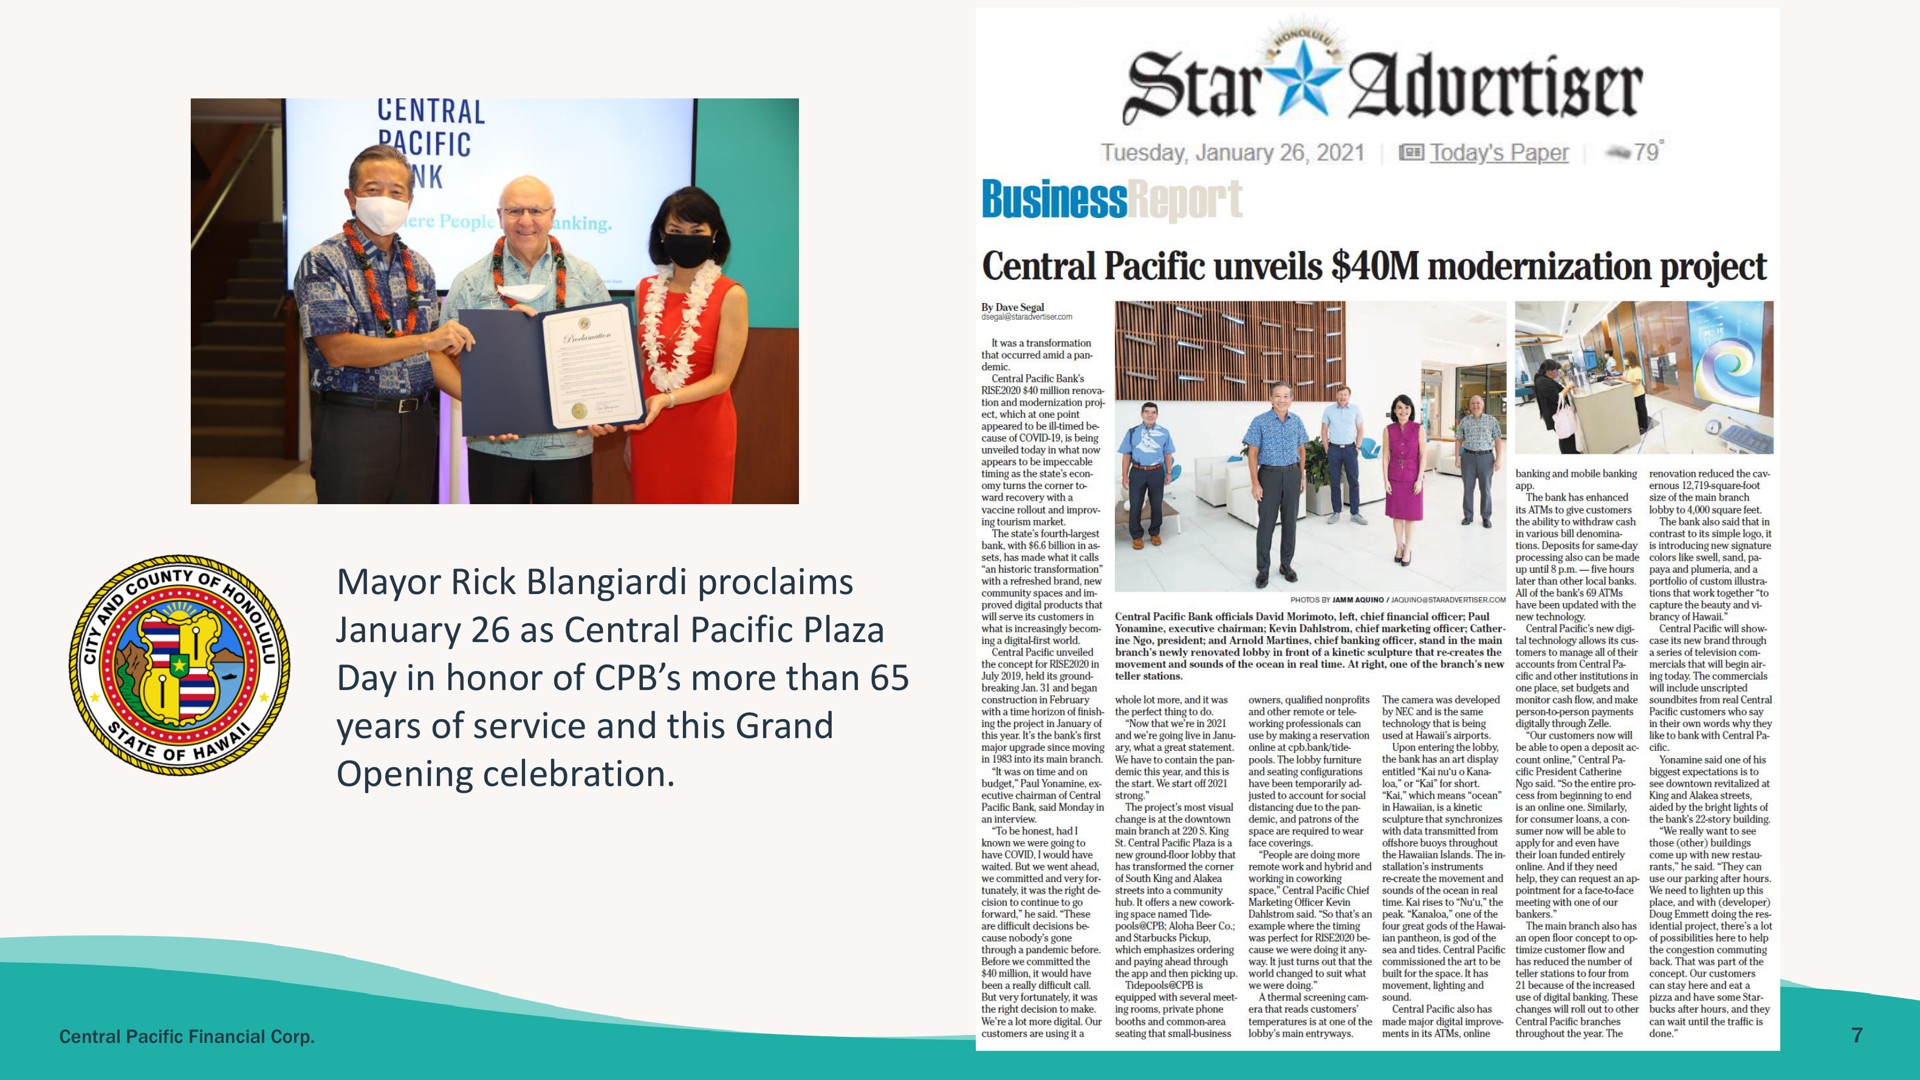 advertiser business central pacific unveils modernization project as central pacific plaza day in honor of more than a | Central Pacific Financial